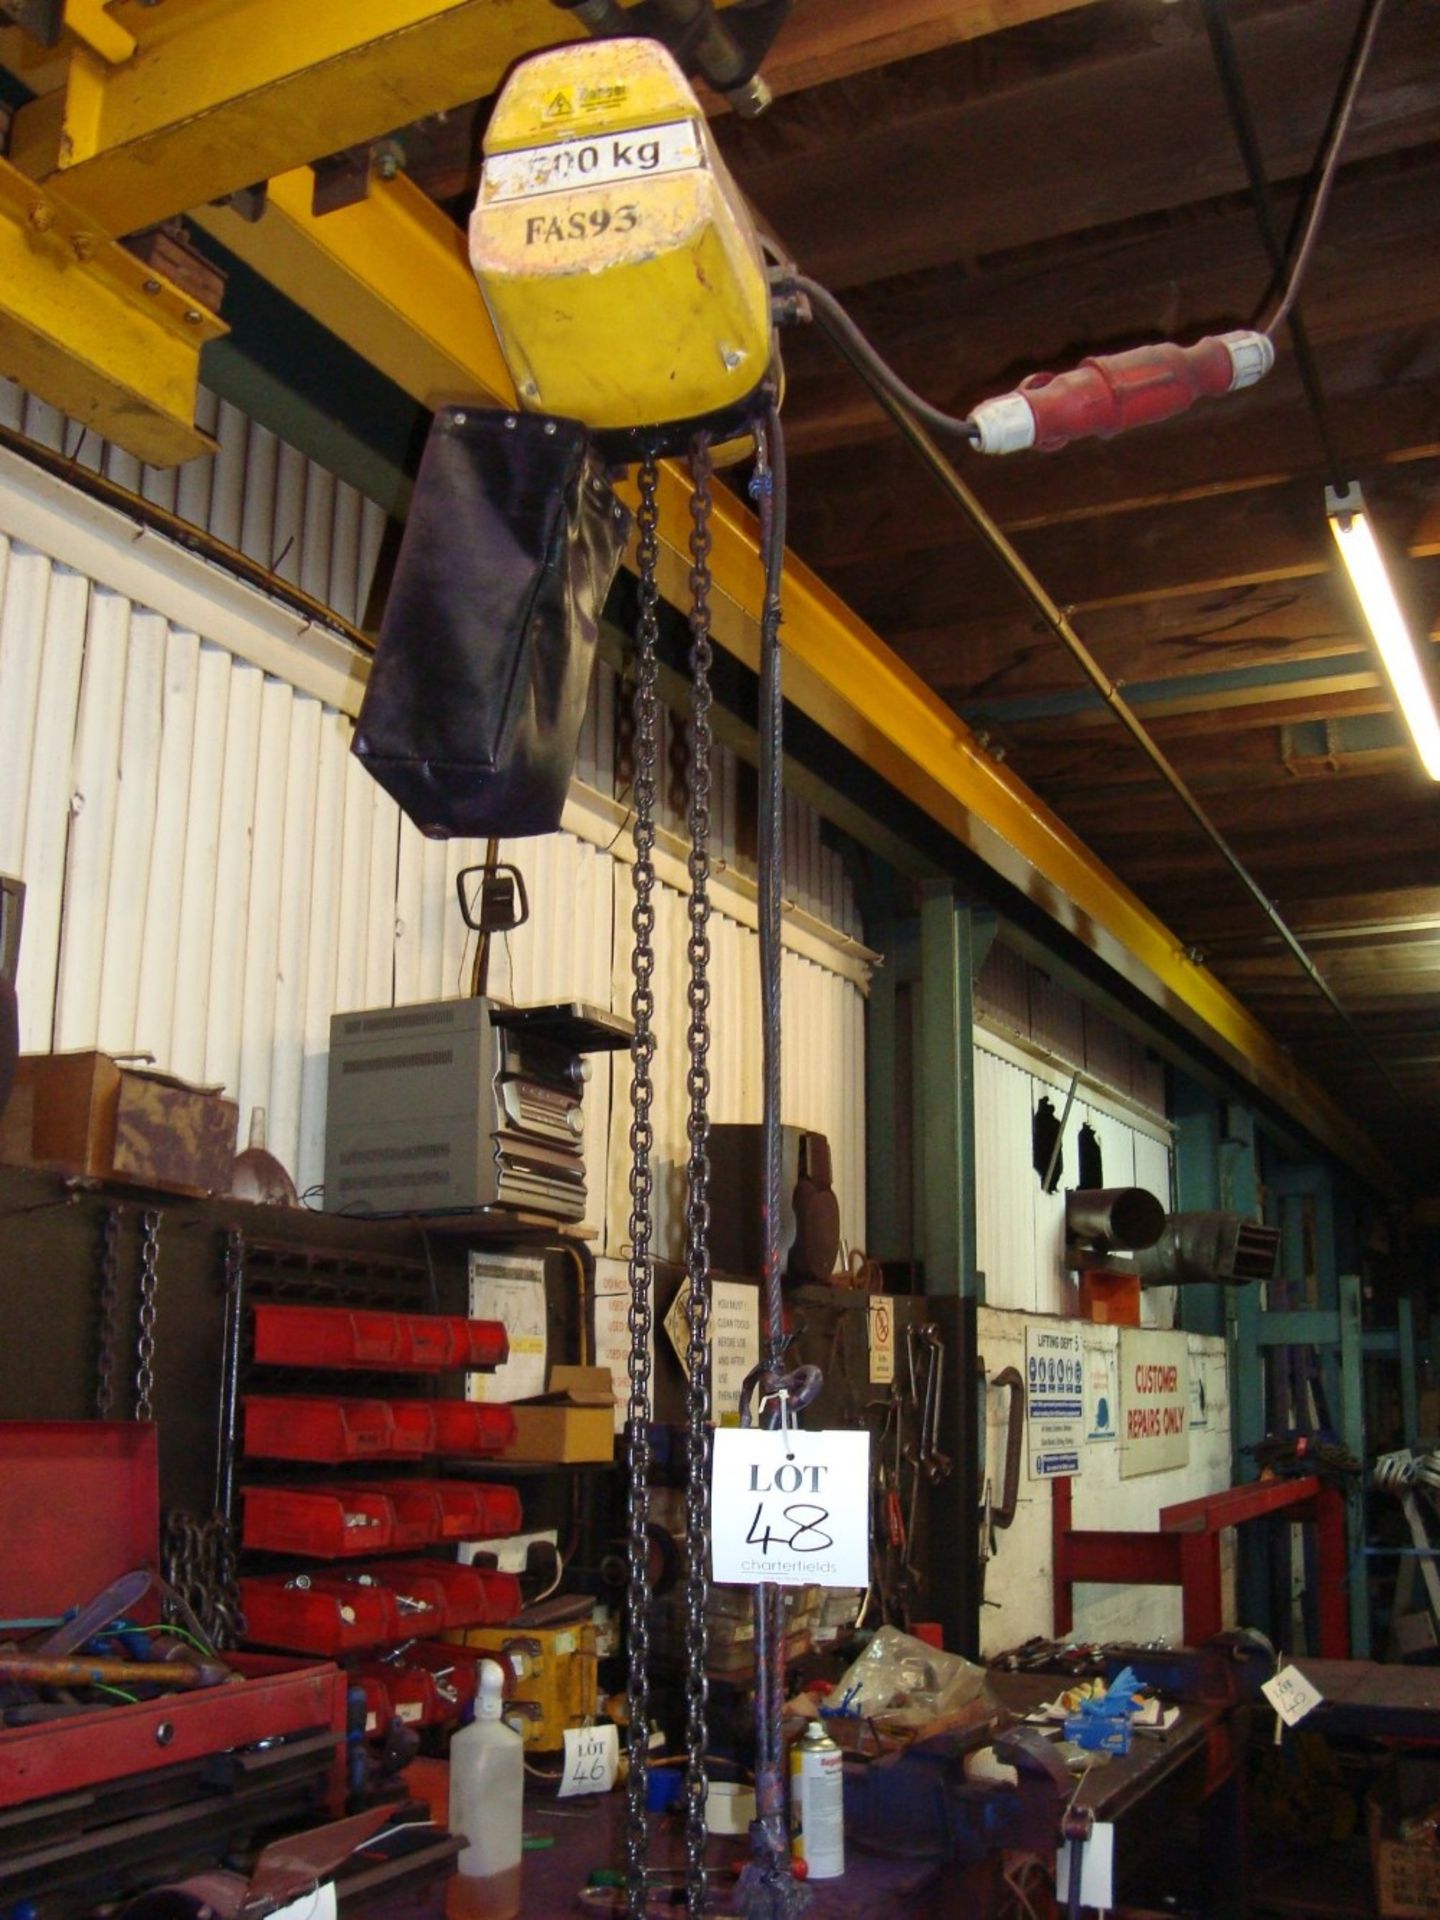 2 - Morris 500kg pendant controlled travelling chain hoists (METHOD STATEMENT AND RISK ASSESSMENT